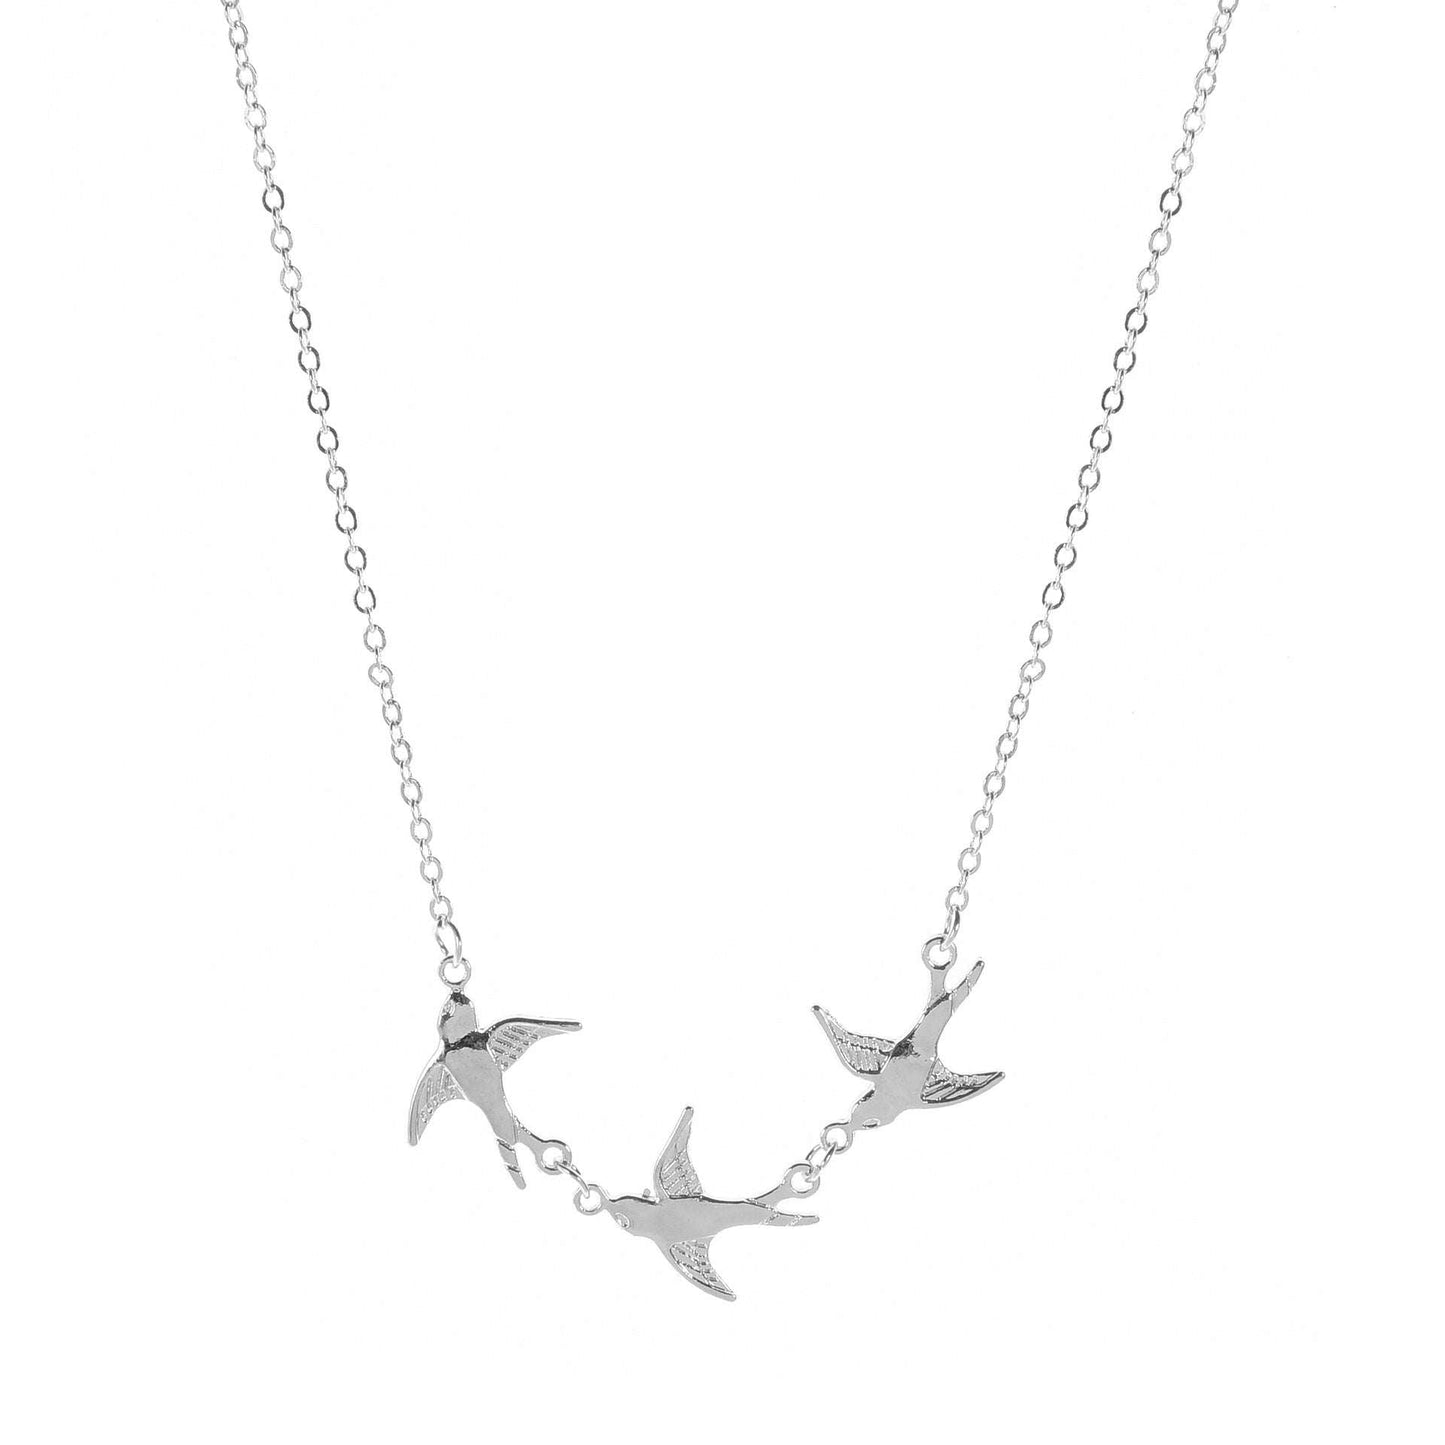 Fashionable necklace, Peace dove necklace, Women's jewelry - available at Sparq Mart